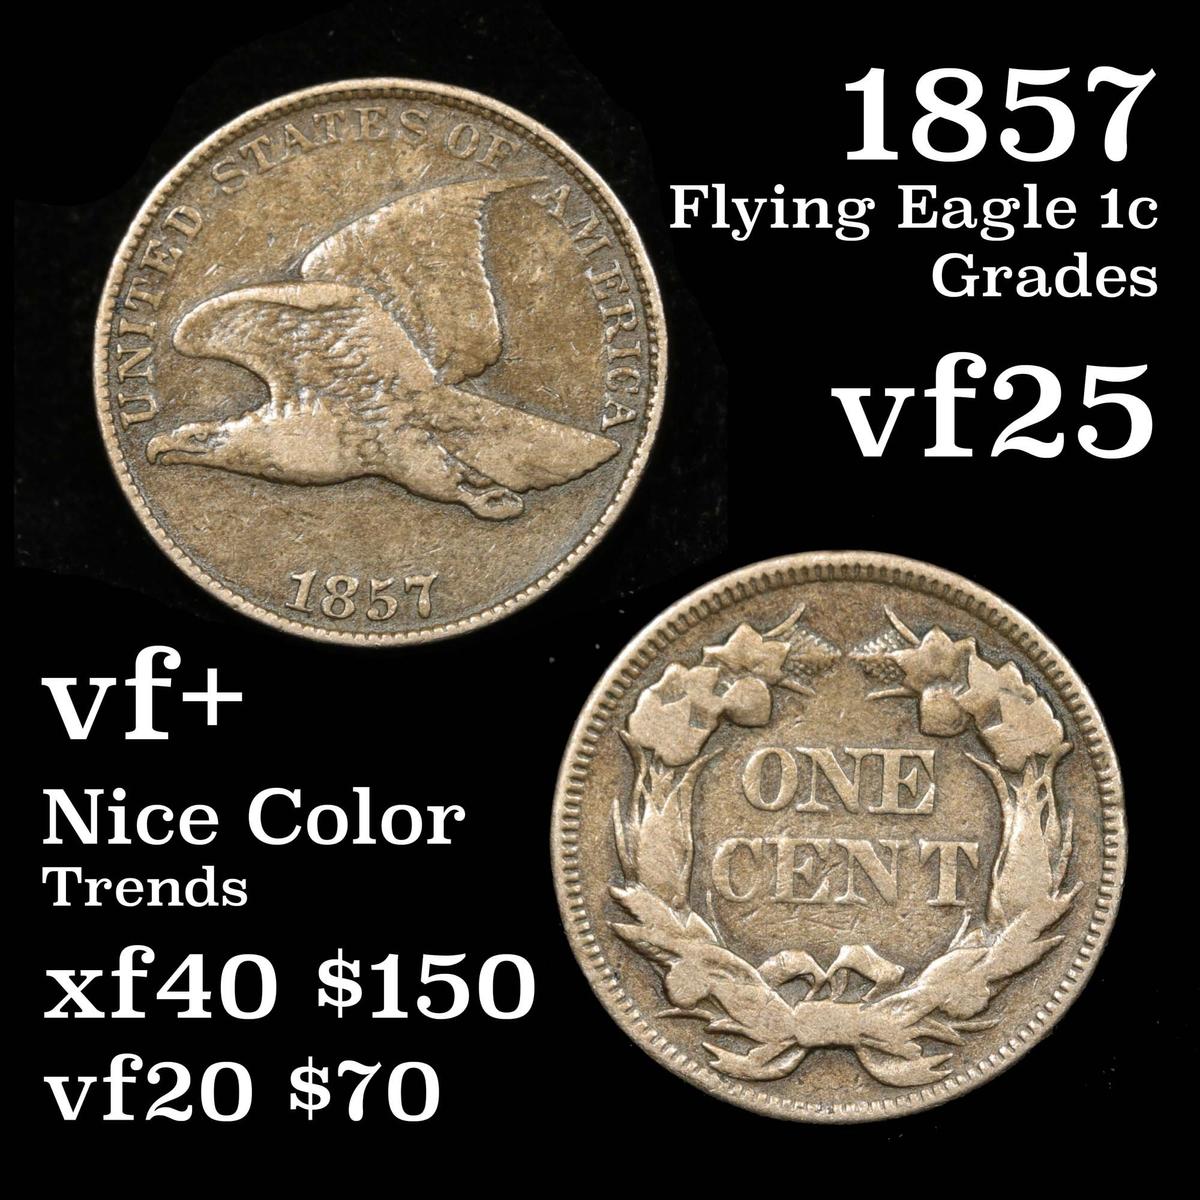 Tough 2 year type coin 1857 Flying Eagle Cent 1c Grades vf+